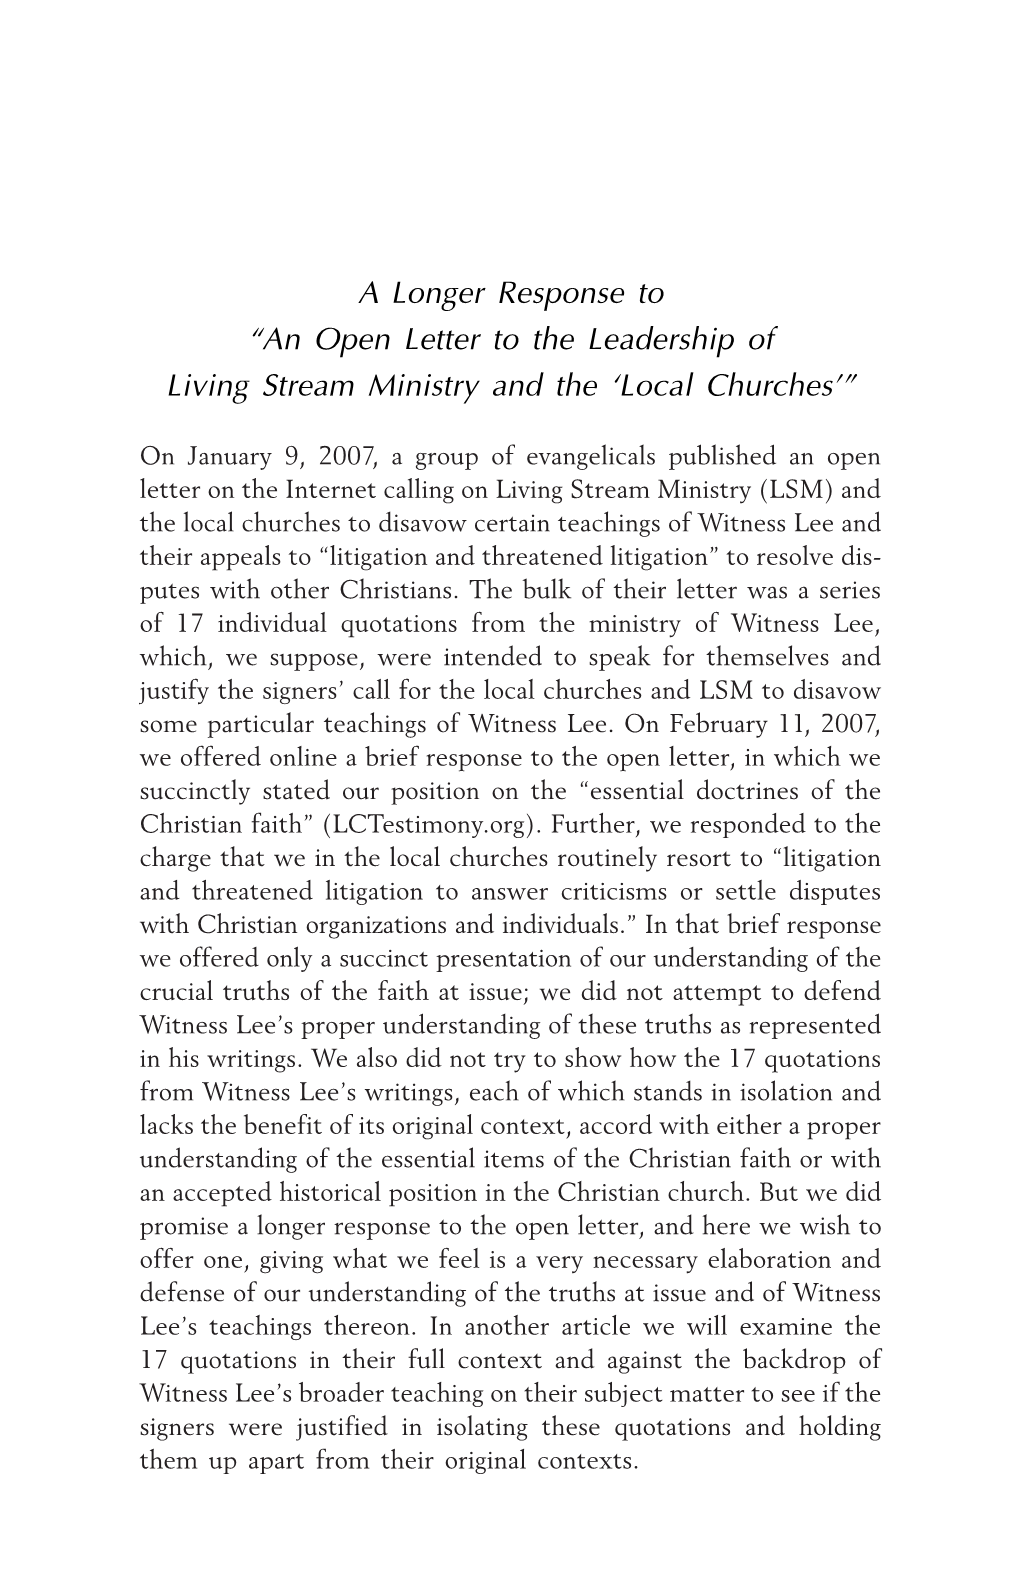 Longer Response to "An Open Letter to the Leadership of Living Stream Ministry and the 'Local Churches'"